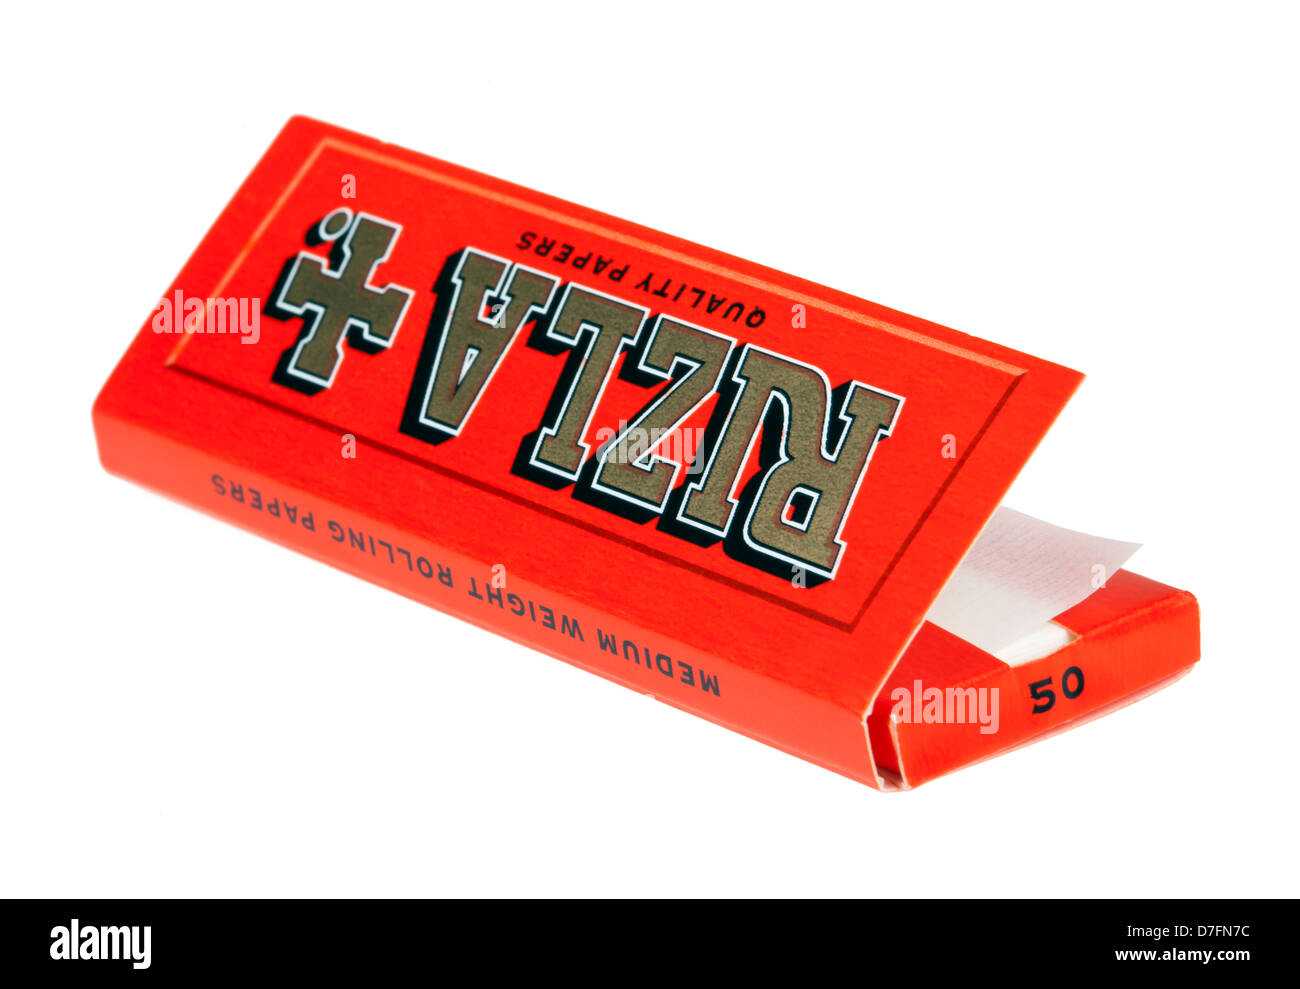 Tel-Aviv Israel - March 20th 2011: full pack Rizla rolling papers. This is orange pack short papers which contains thickest Stock Photo